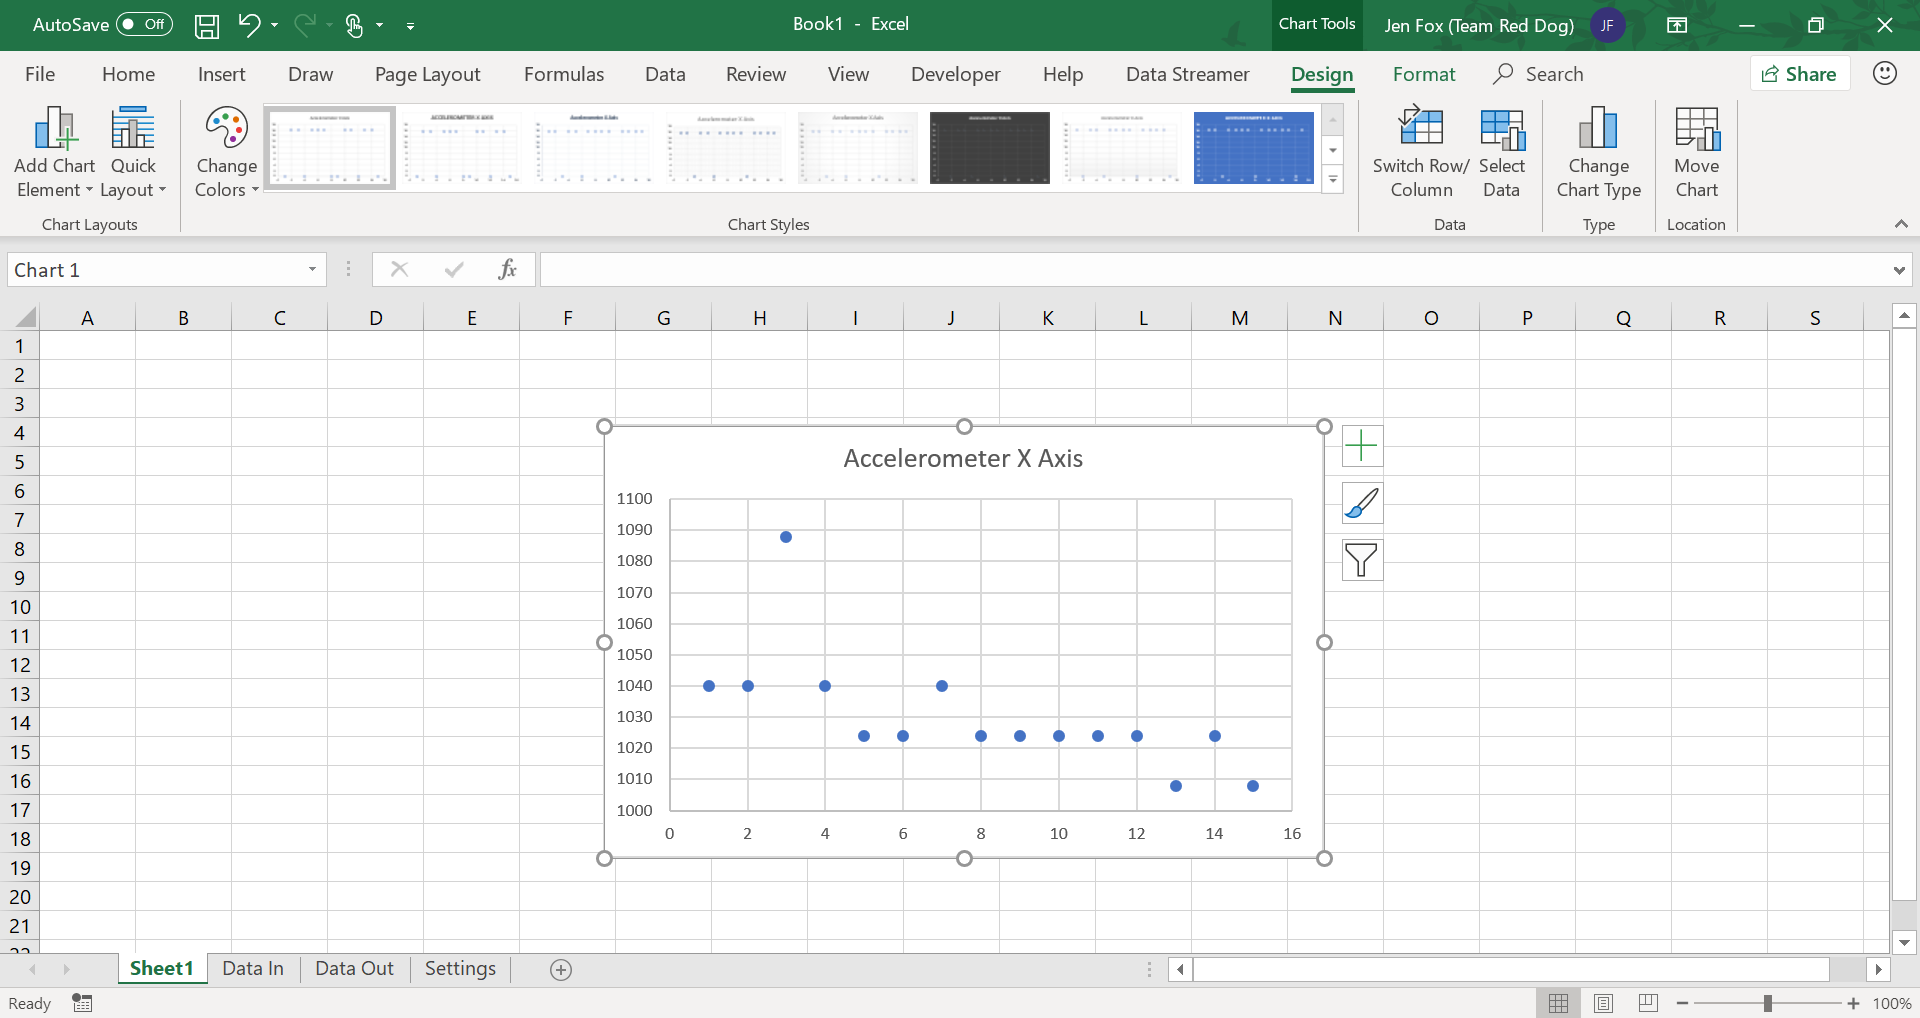 arduino data acquisition into excel for mac